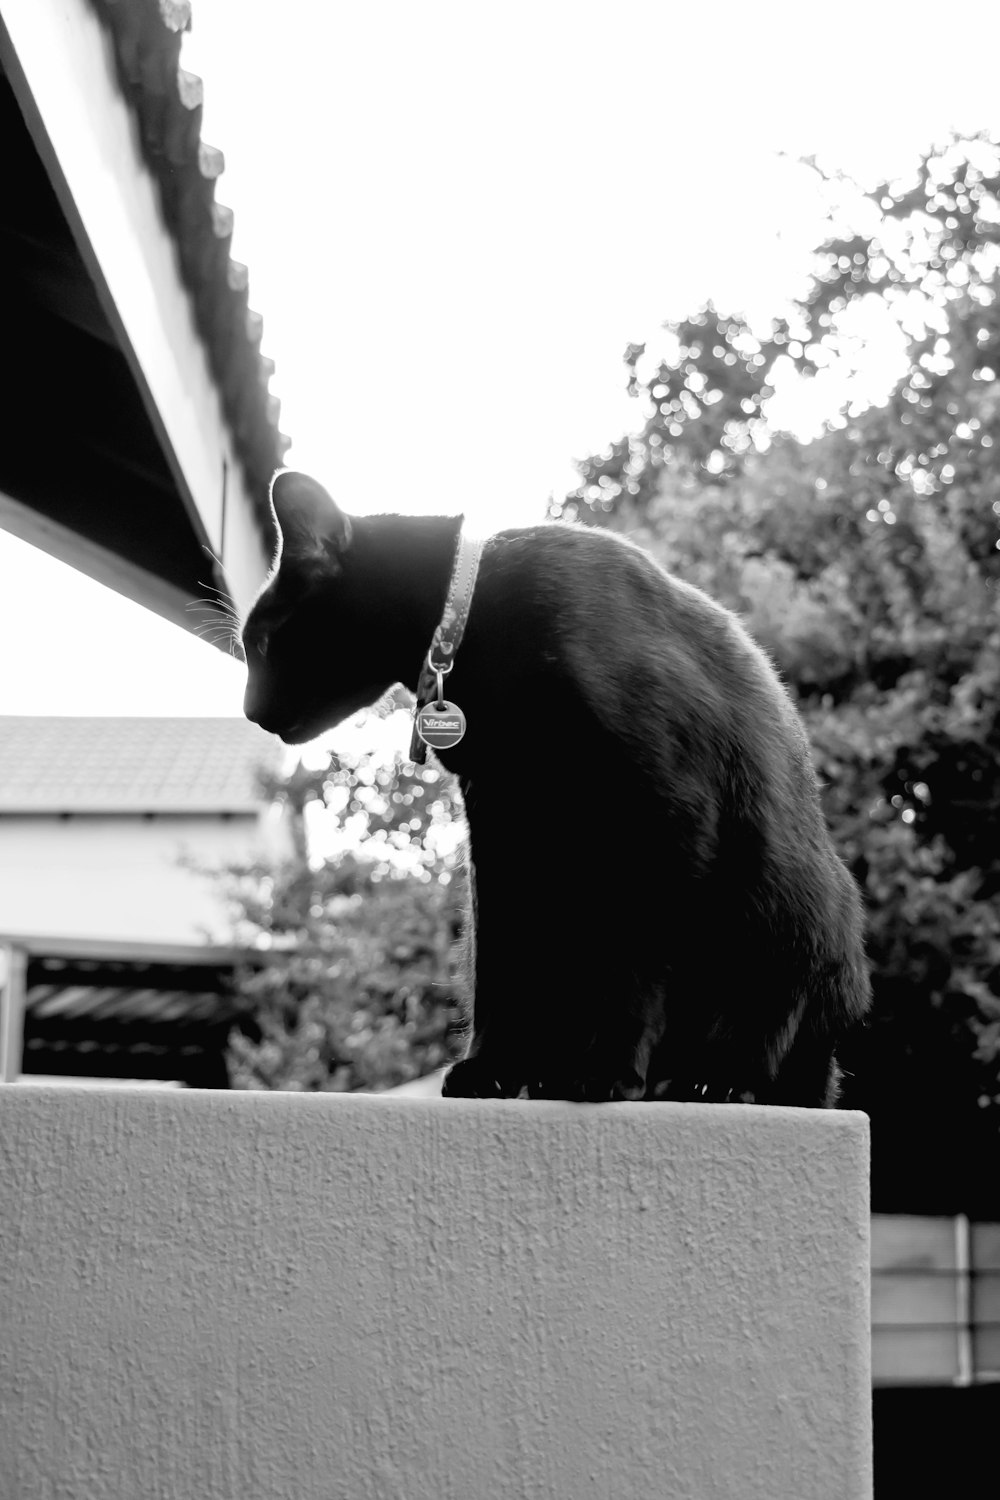 grayscale photo of cat sitting on concrete balustrade